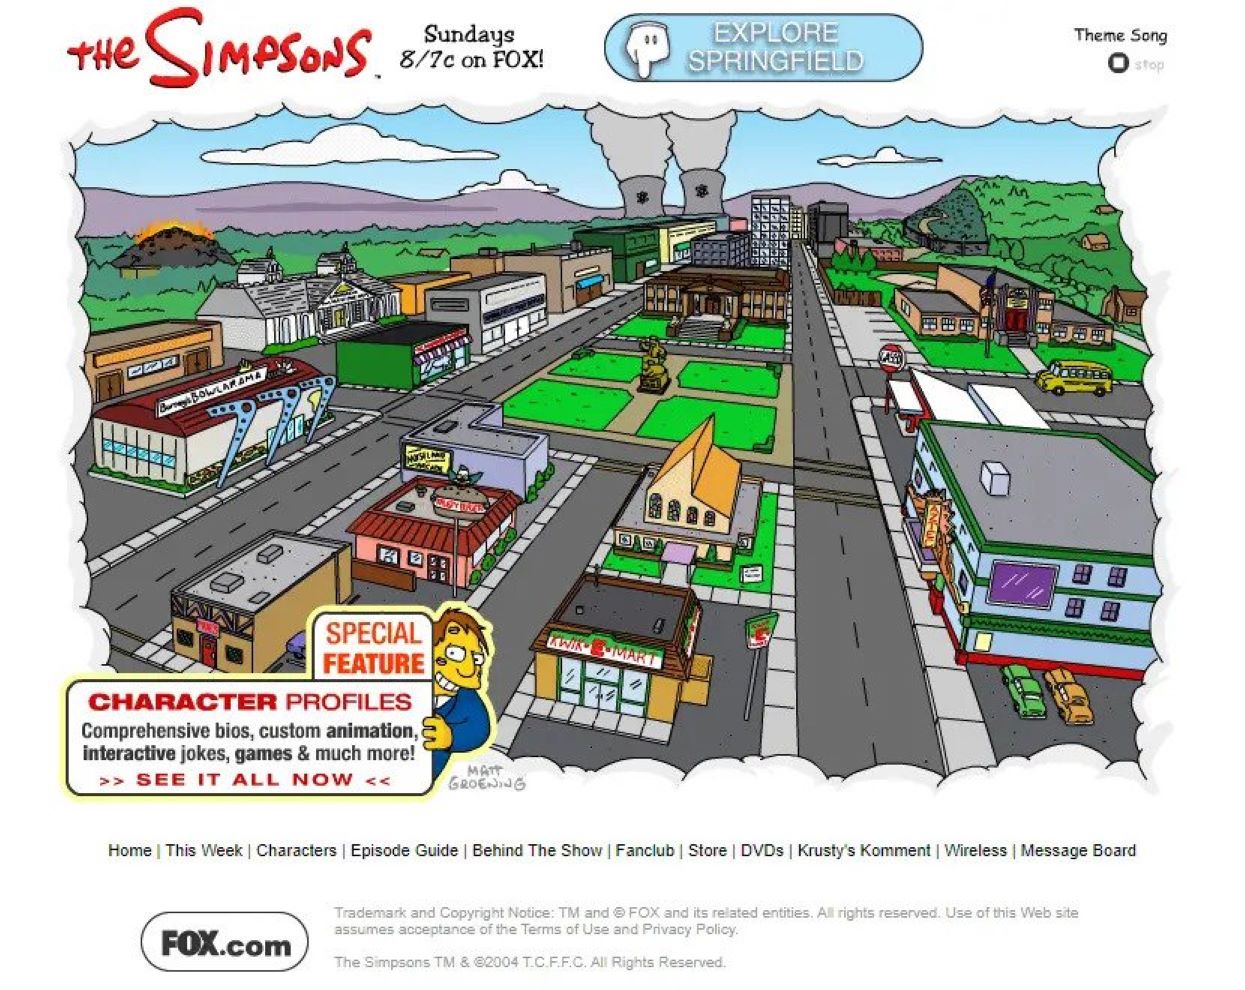 The Simpsons website from 2006